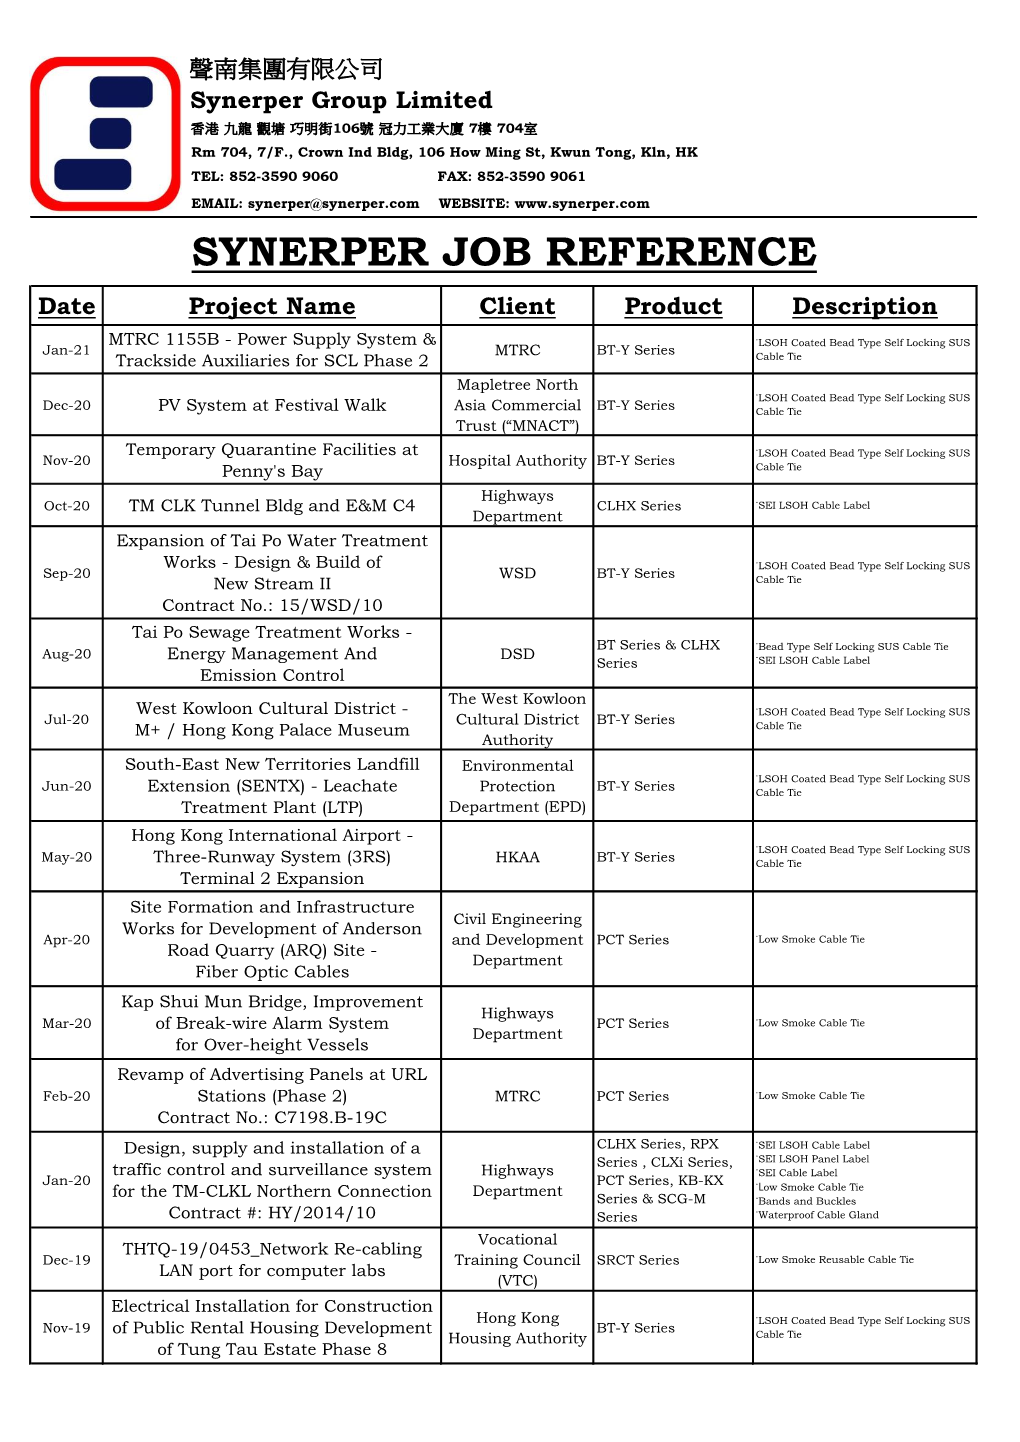 SYNERPER JOB REFERENCE Date Project Name Client Product Description